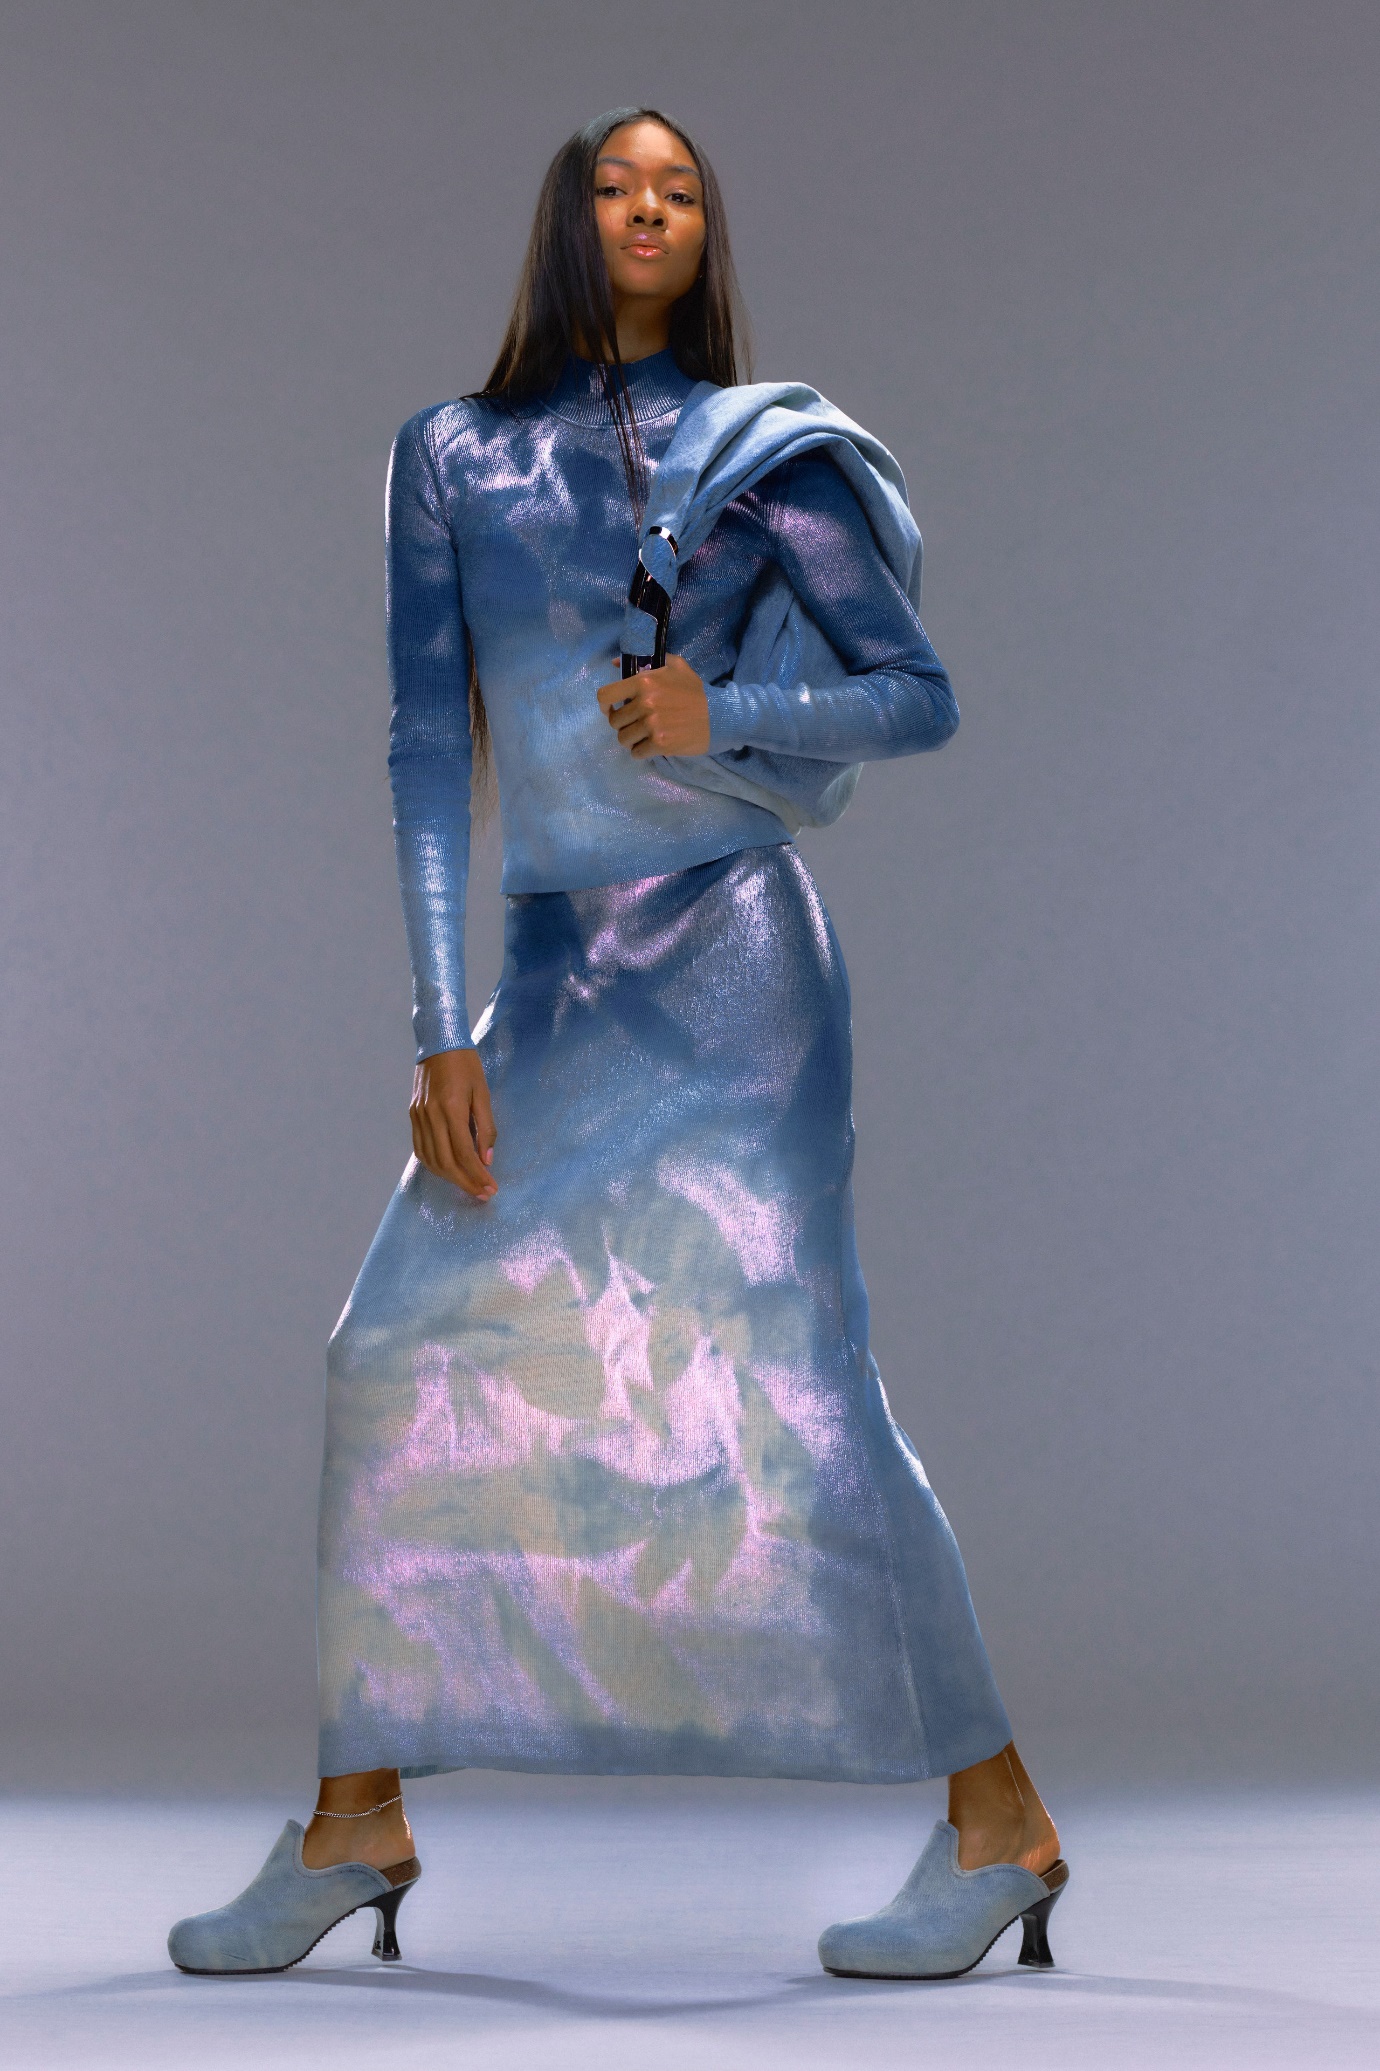 A person in a blue dress Description automatically generated